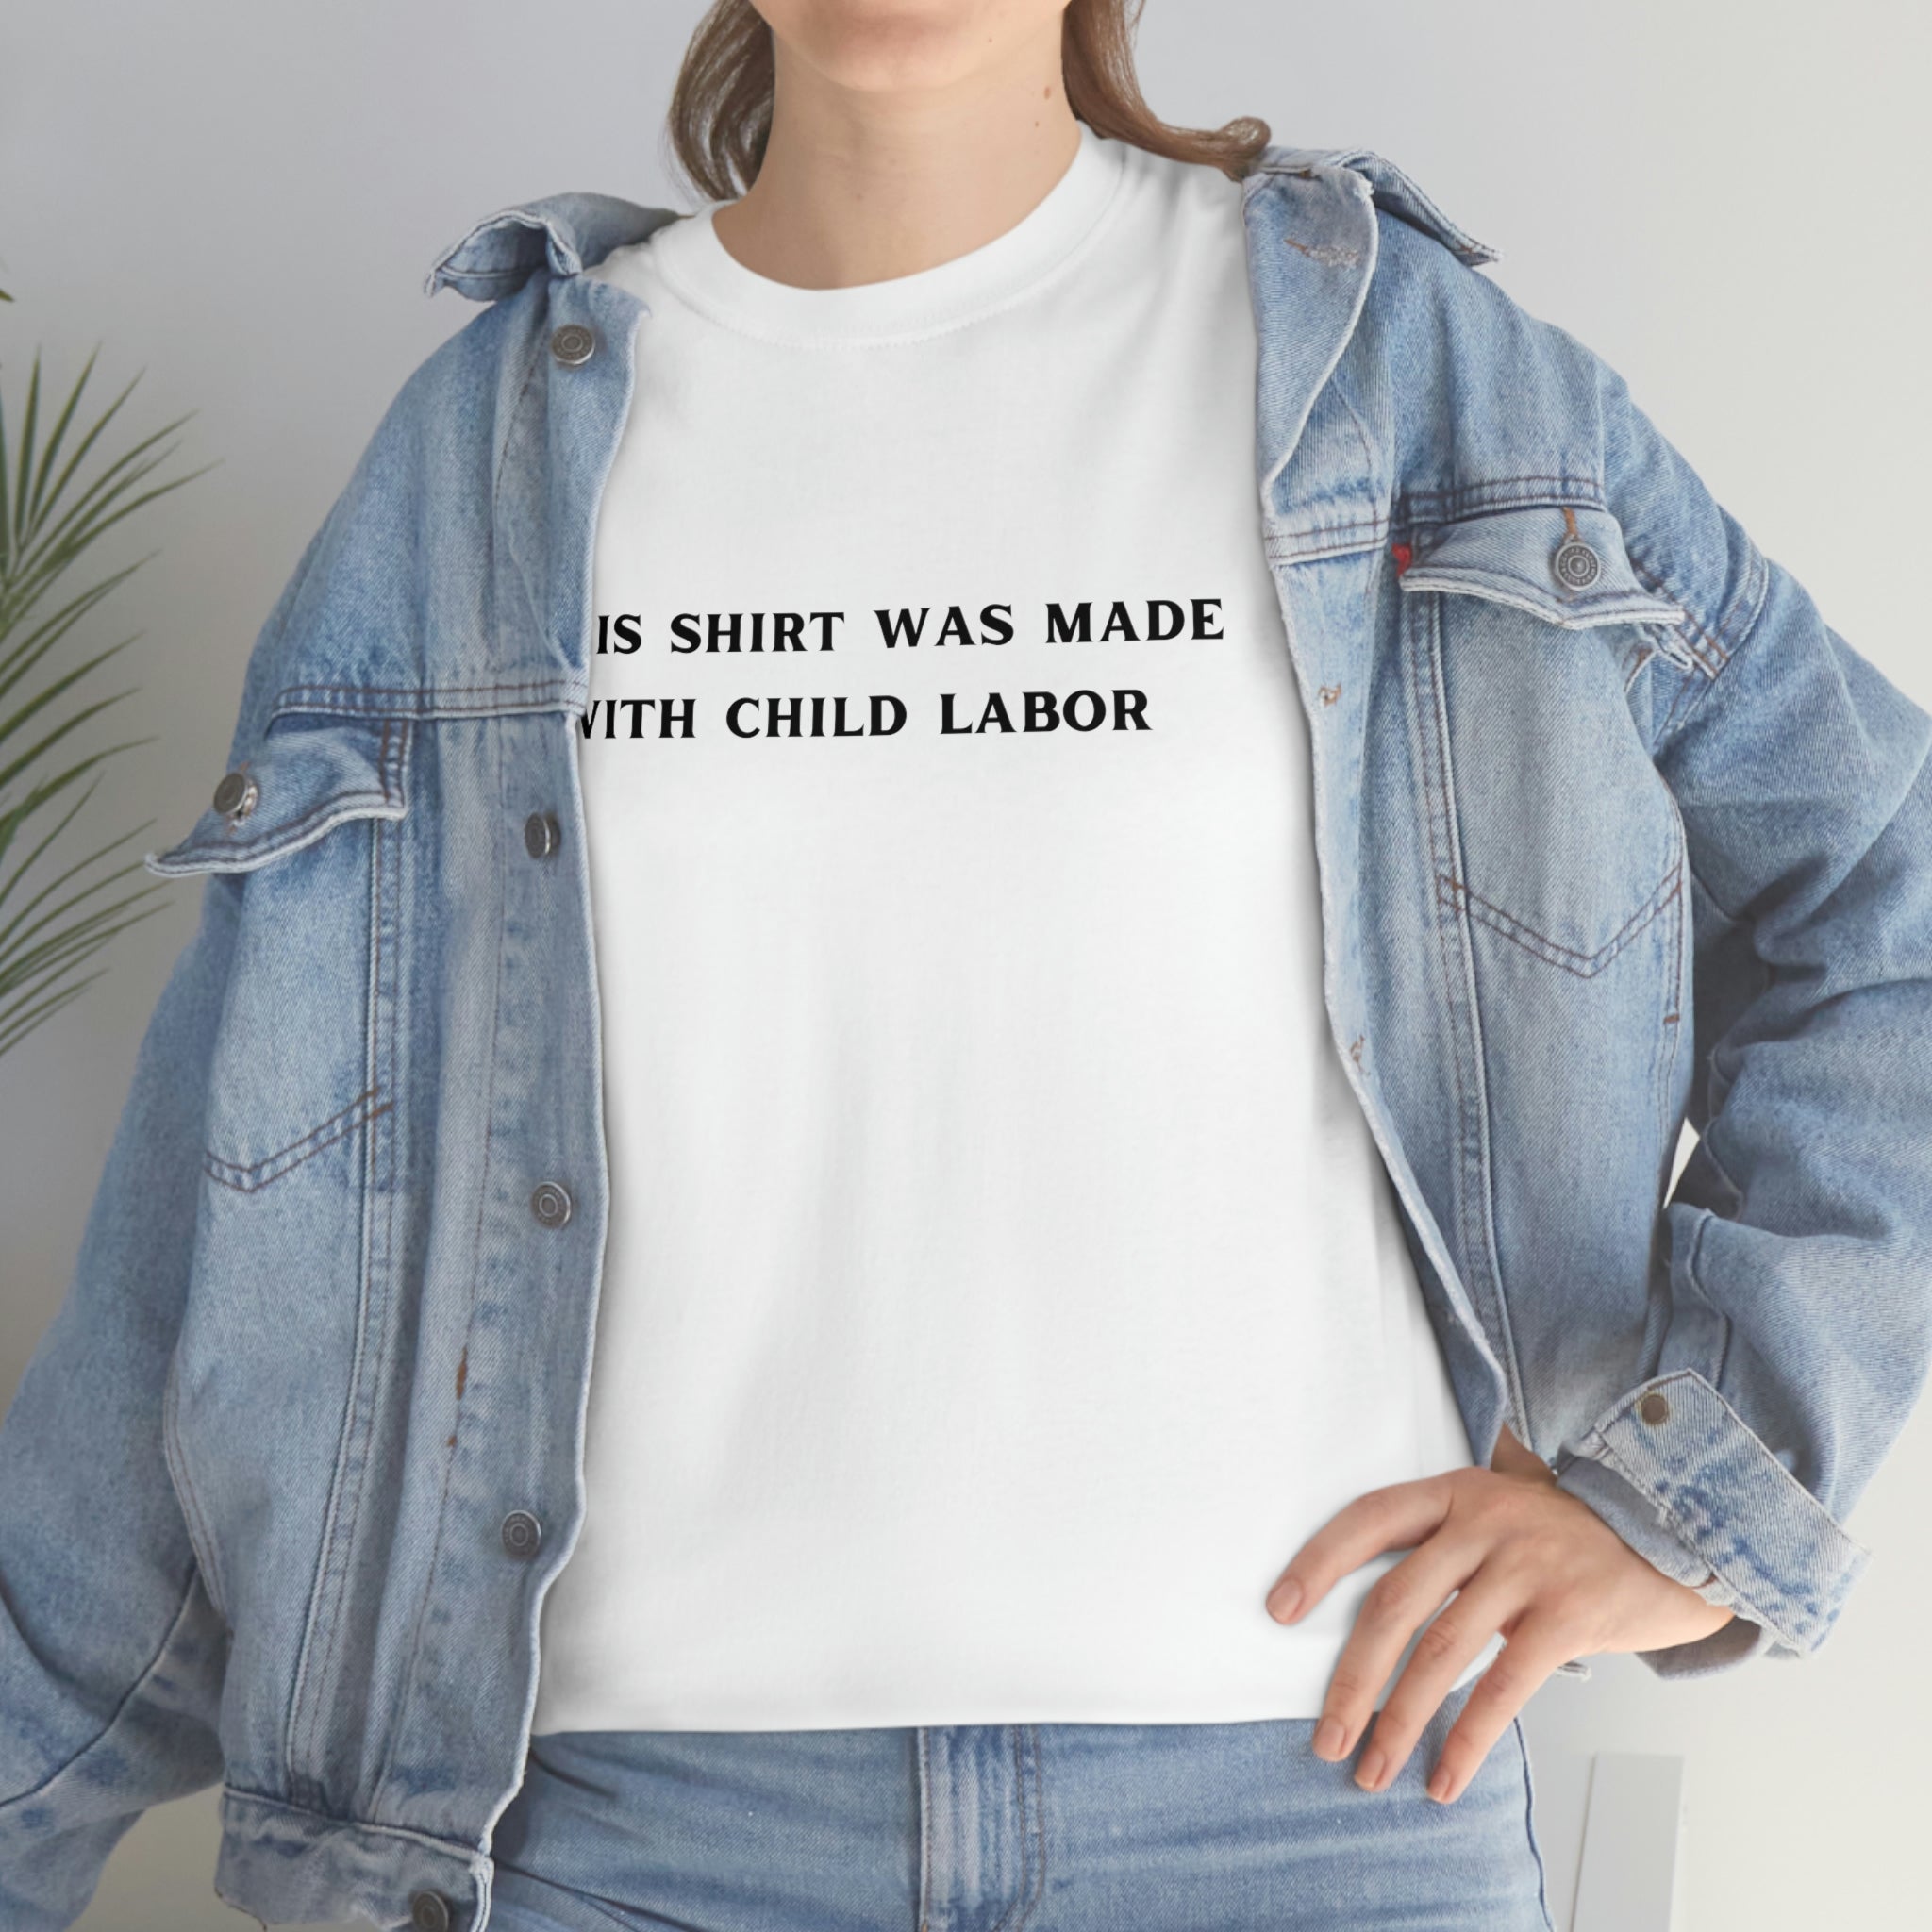 This Shirt Wad Made With Child Labor (American Spelling) - Unisex Heavy Cotton Tee